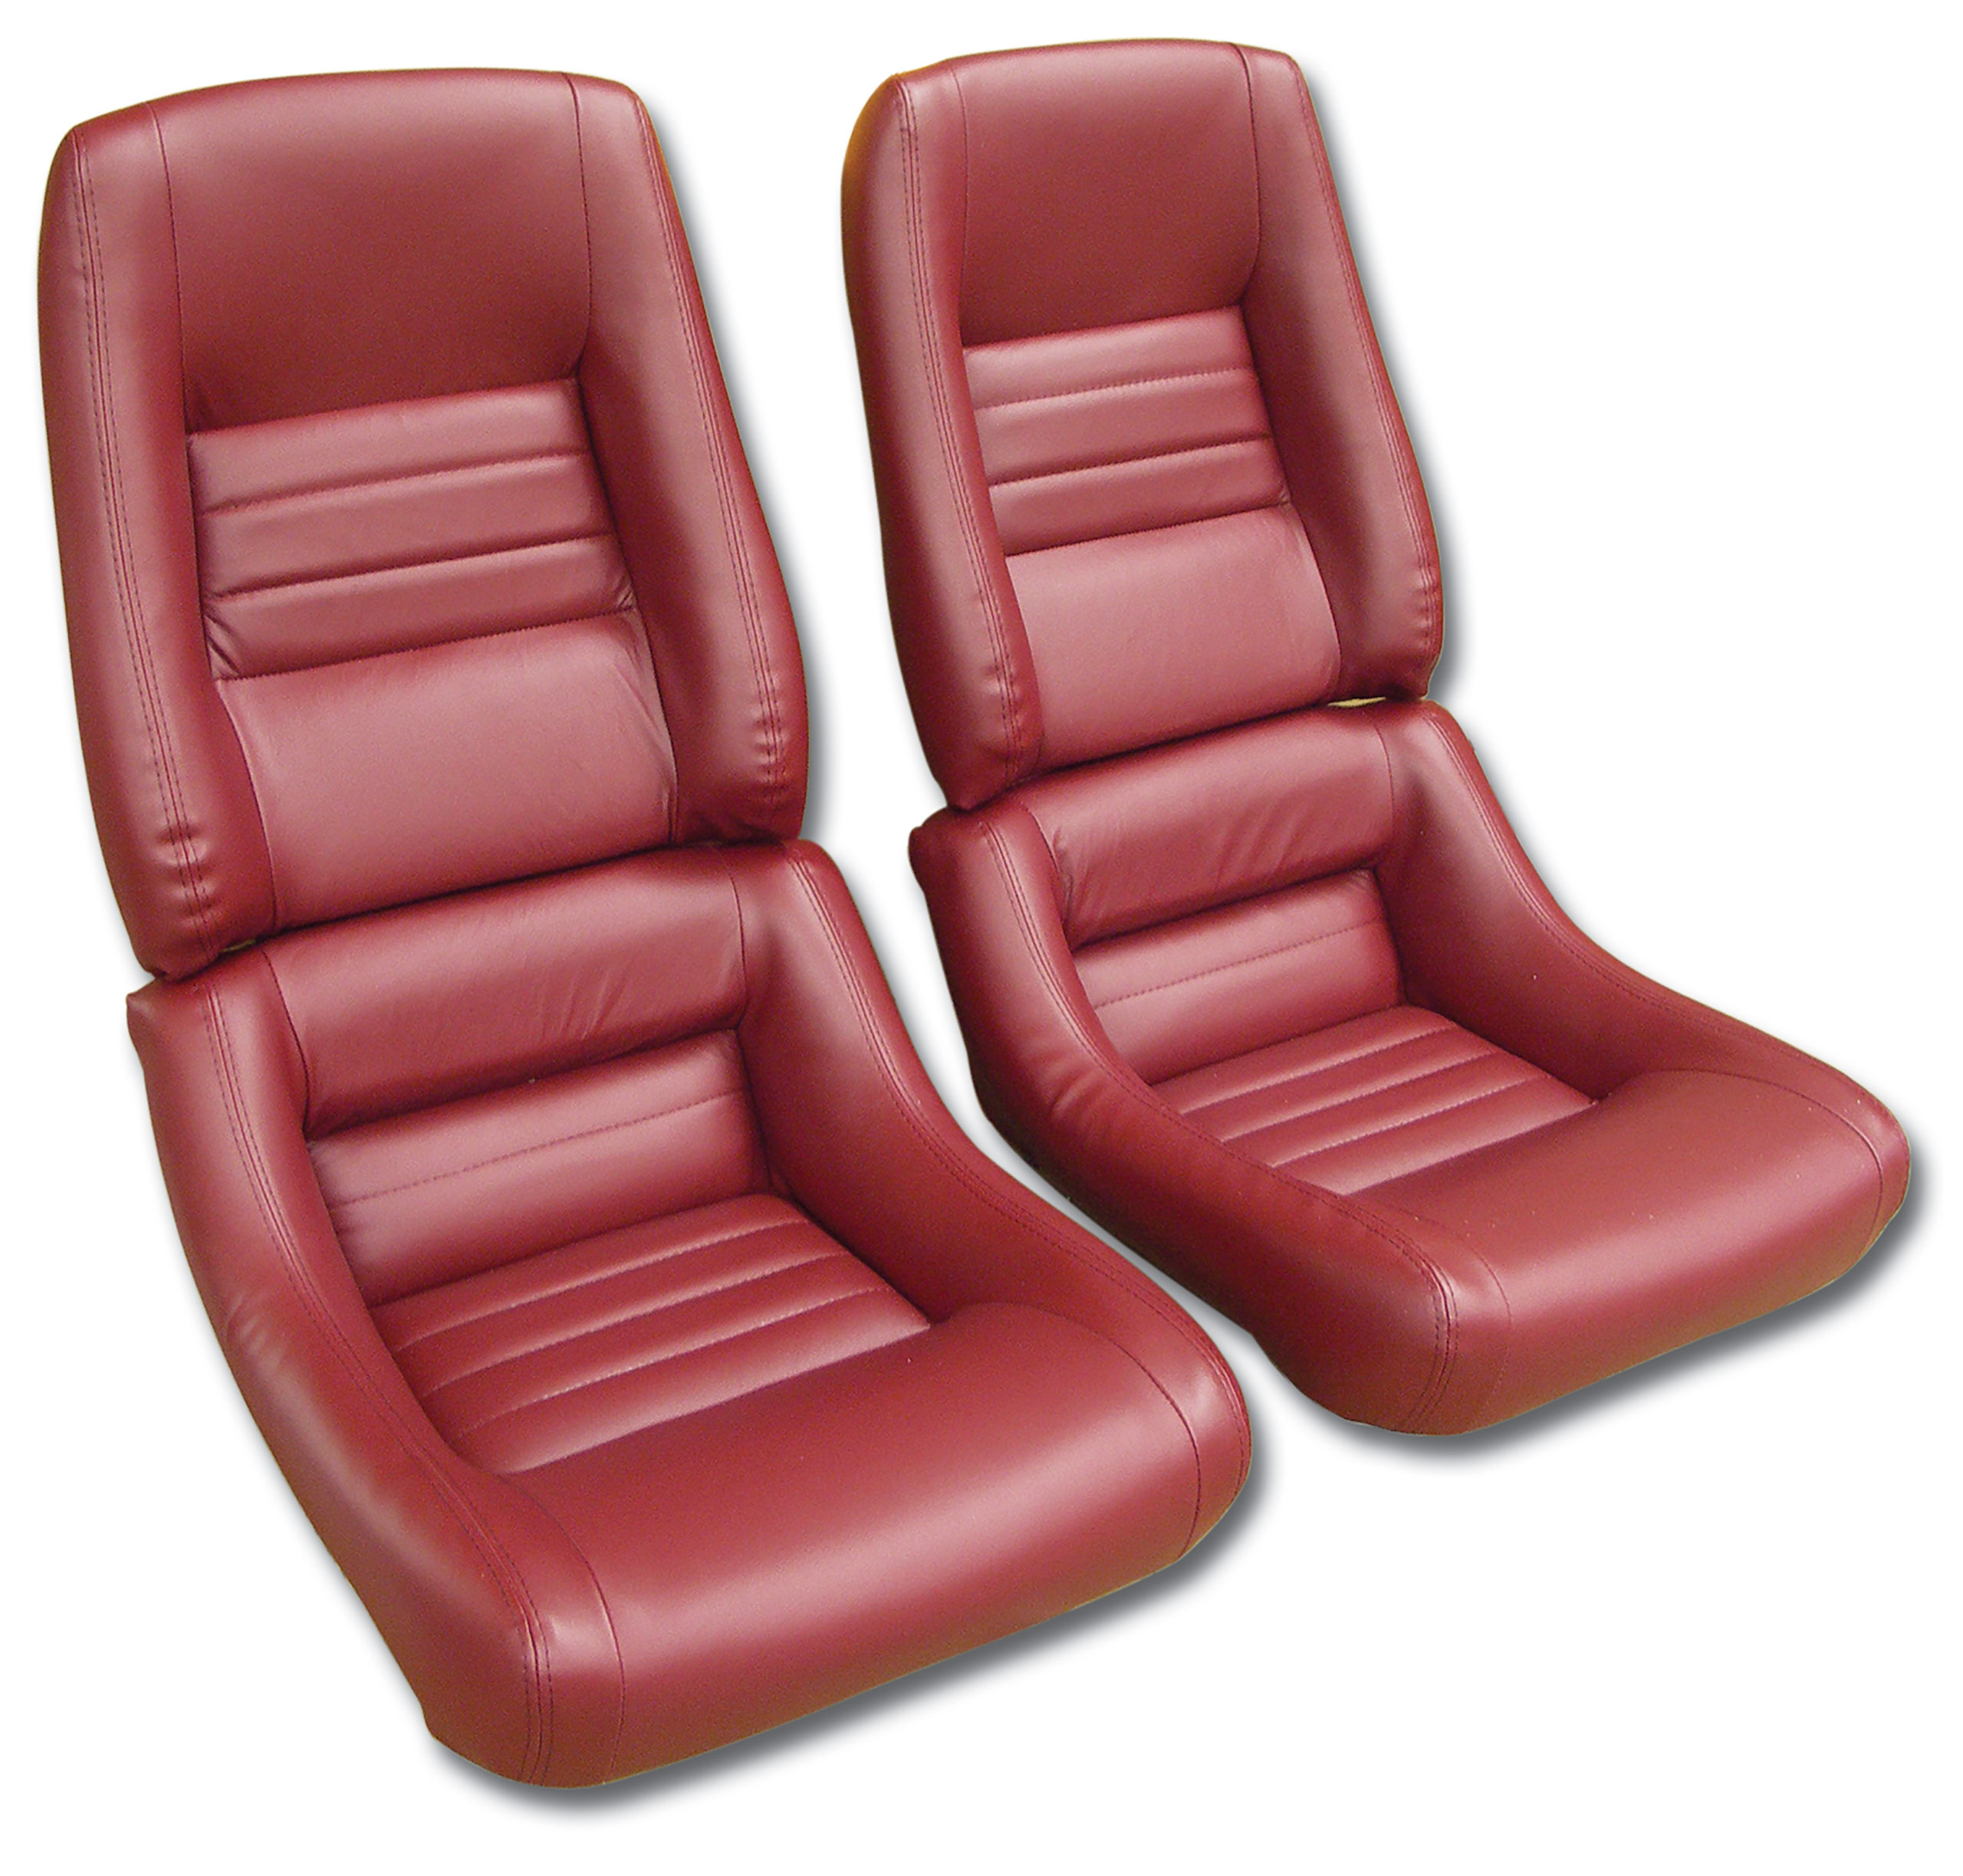 Mounted Leather Seat Covers Red Leathr/Vinyl Original 4" Bolster For 82 Corvette